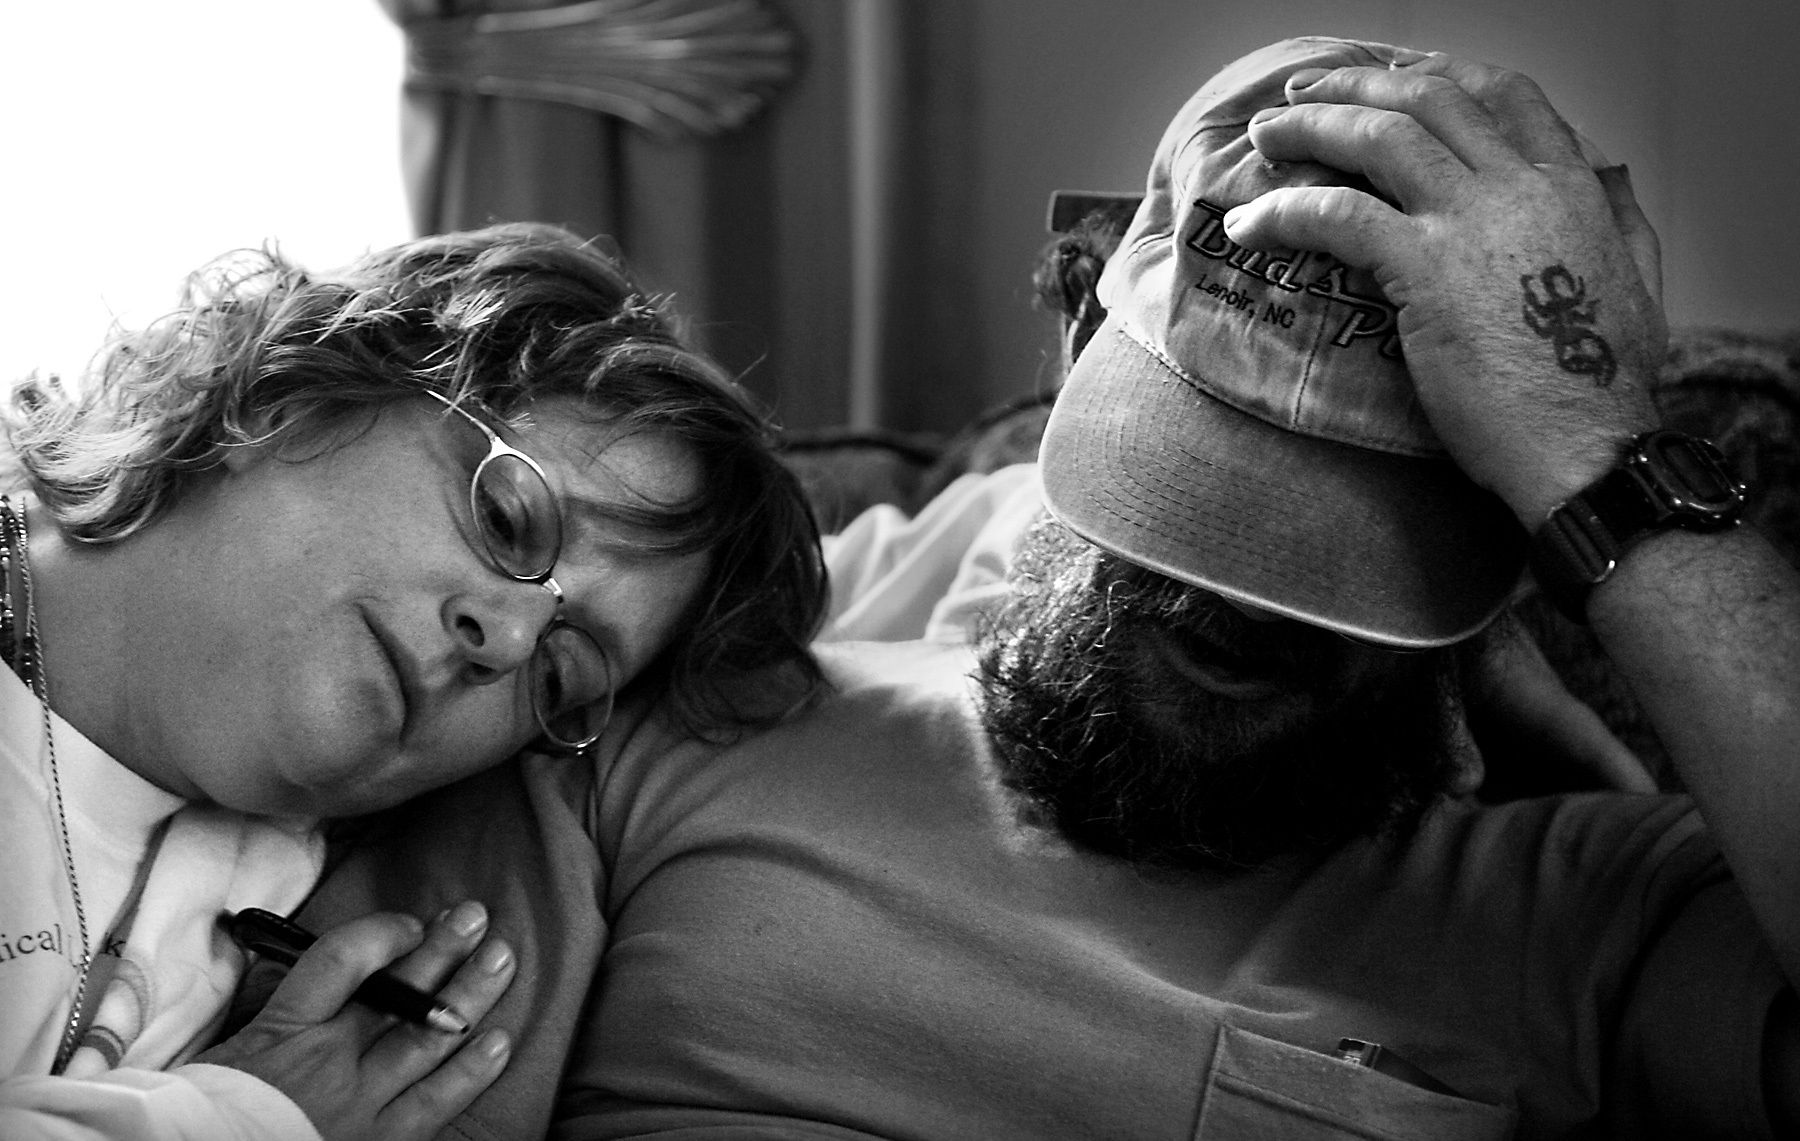 On the day after their mother died, Cassie comforts her brother Mike Snelson while the family make arrangements for Pat's memorial service.